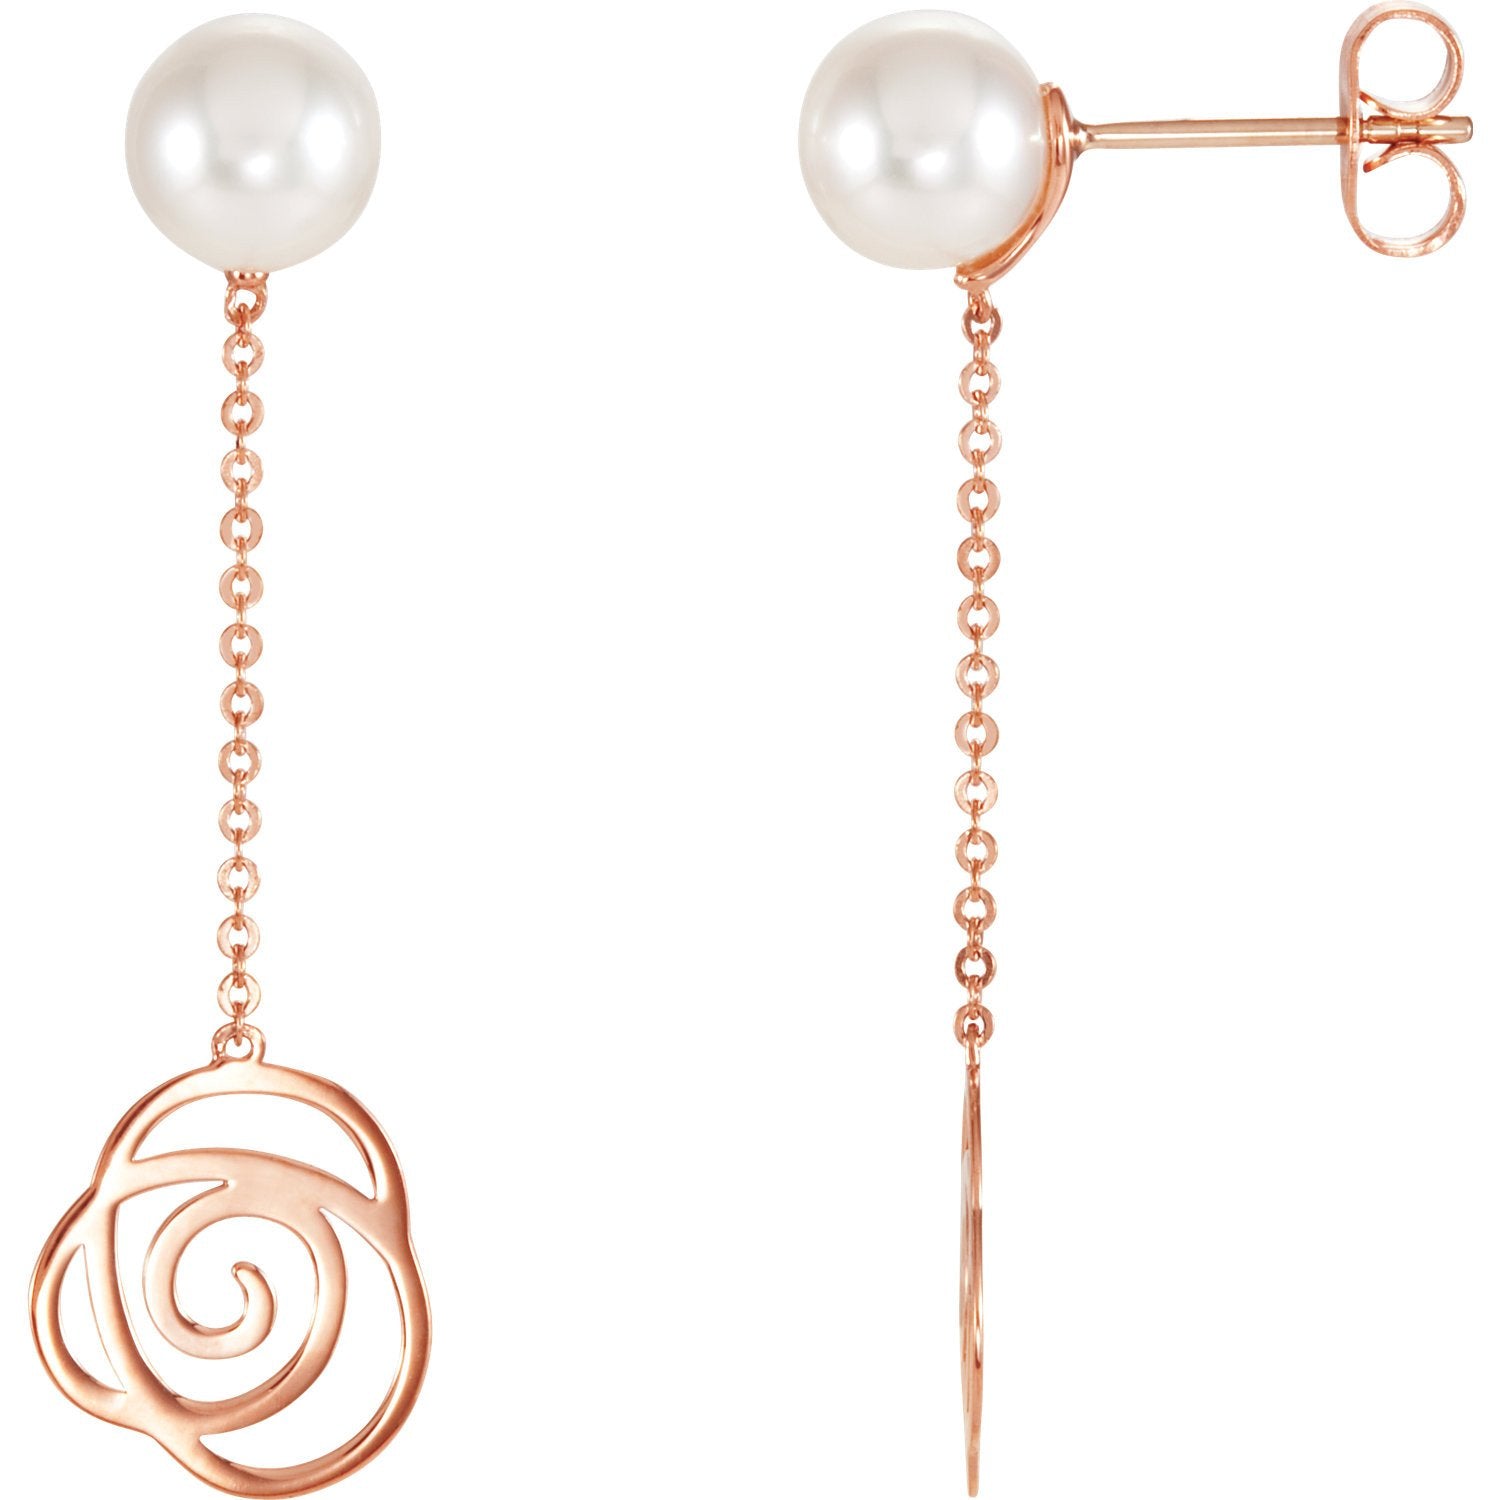 Freshwater Pearl and Rose Floral Chain Earrings - 14k Rose Gold